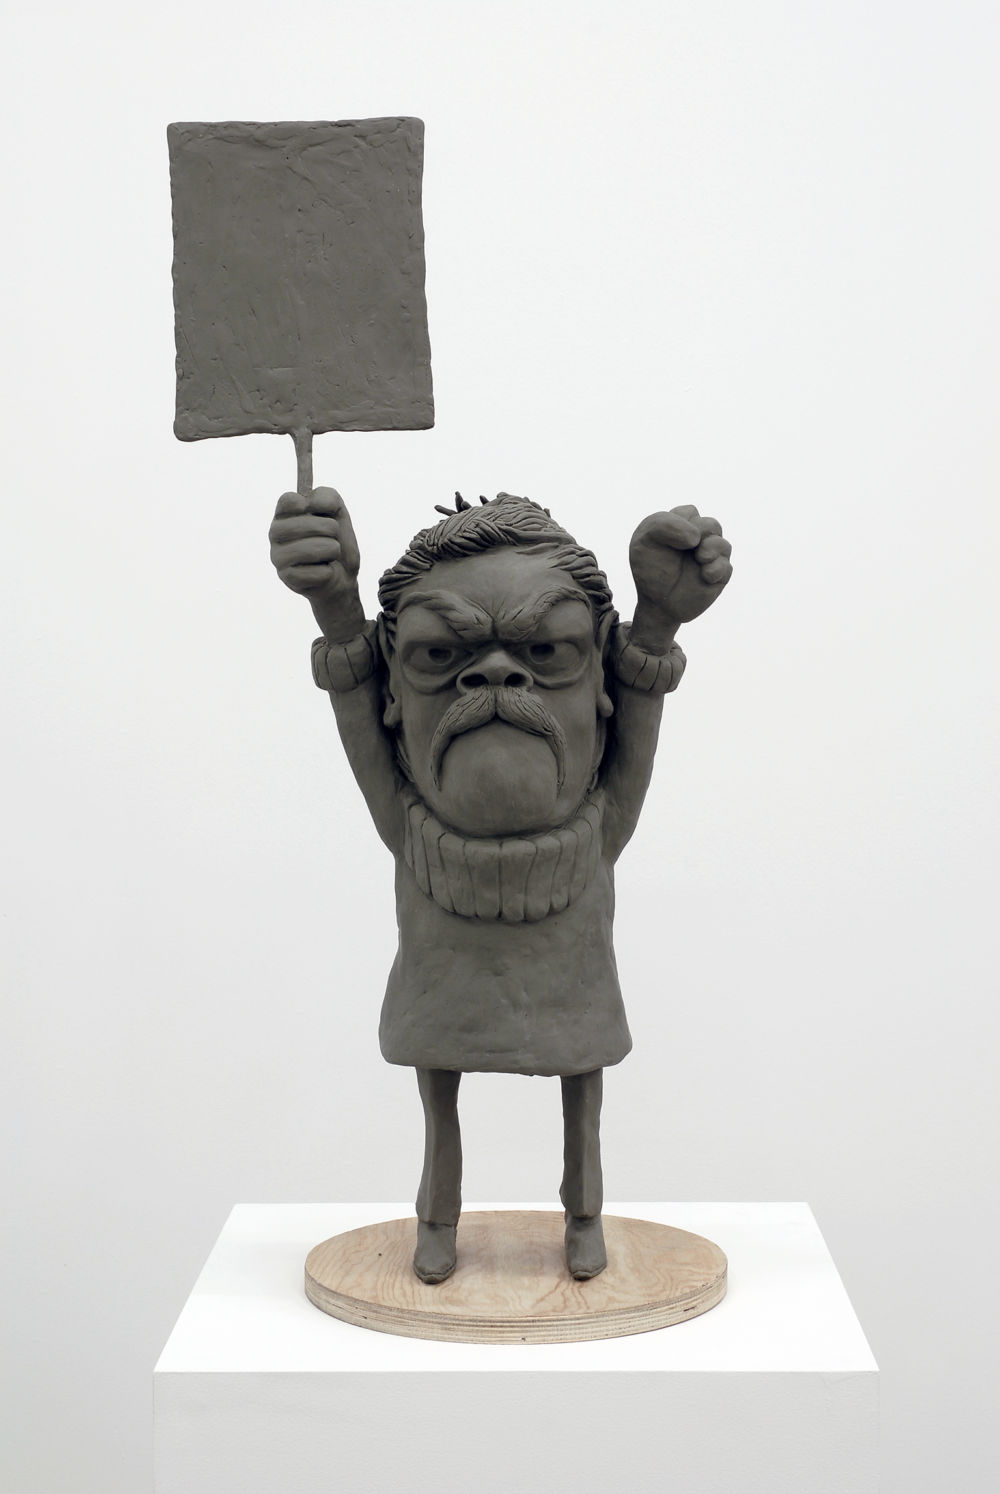 ​Alex Morrison, Proposal for a New Monument at Freedom Square, 2007, modelling clay and wood, 32 x 15 x 12 in. (81 x 38 x 30 cm) by 